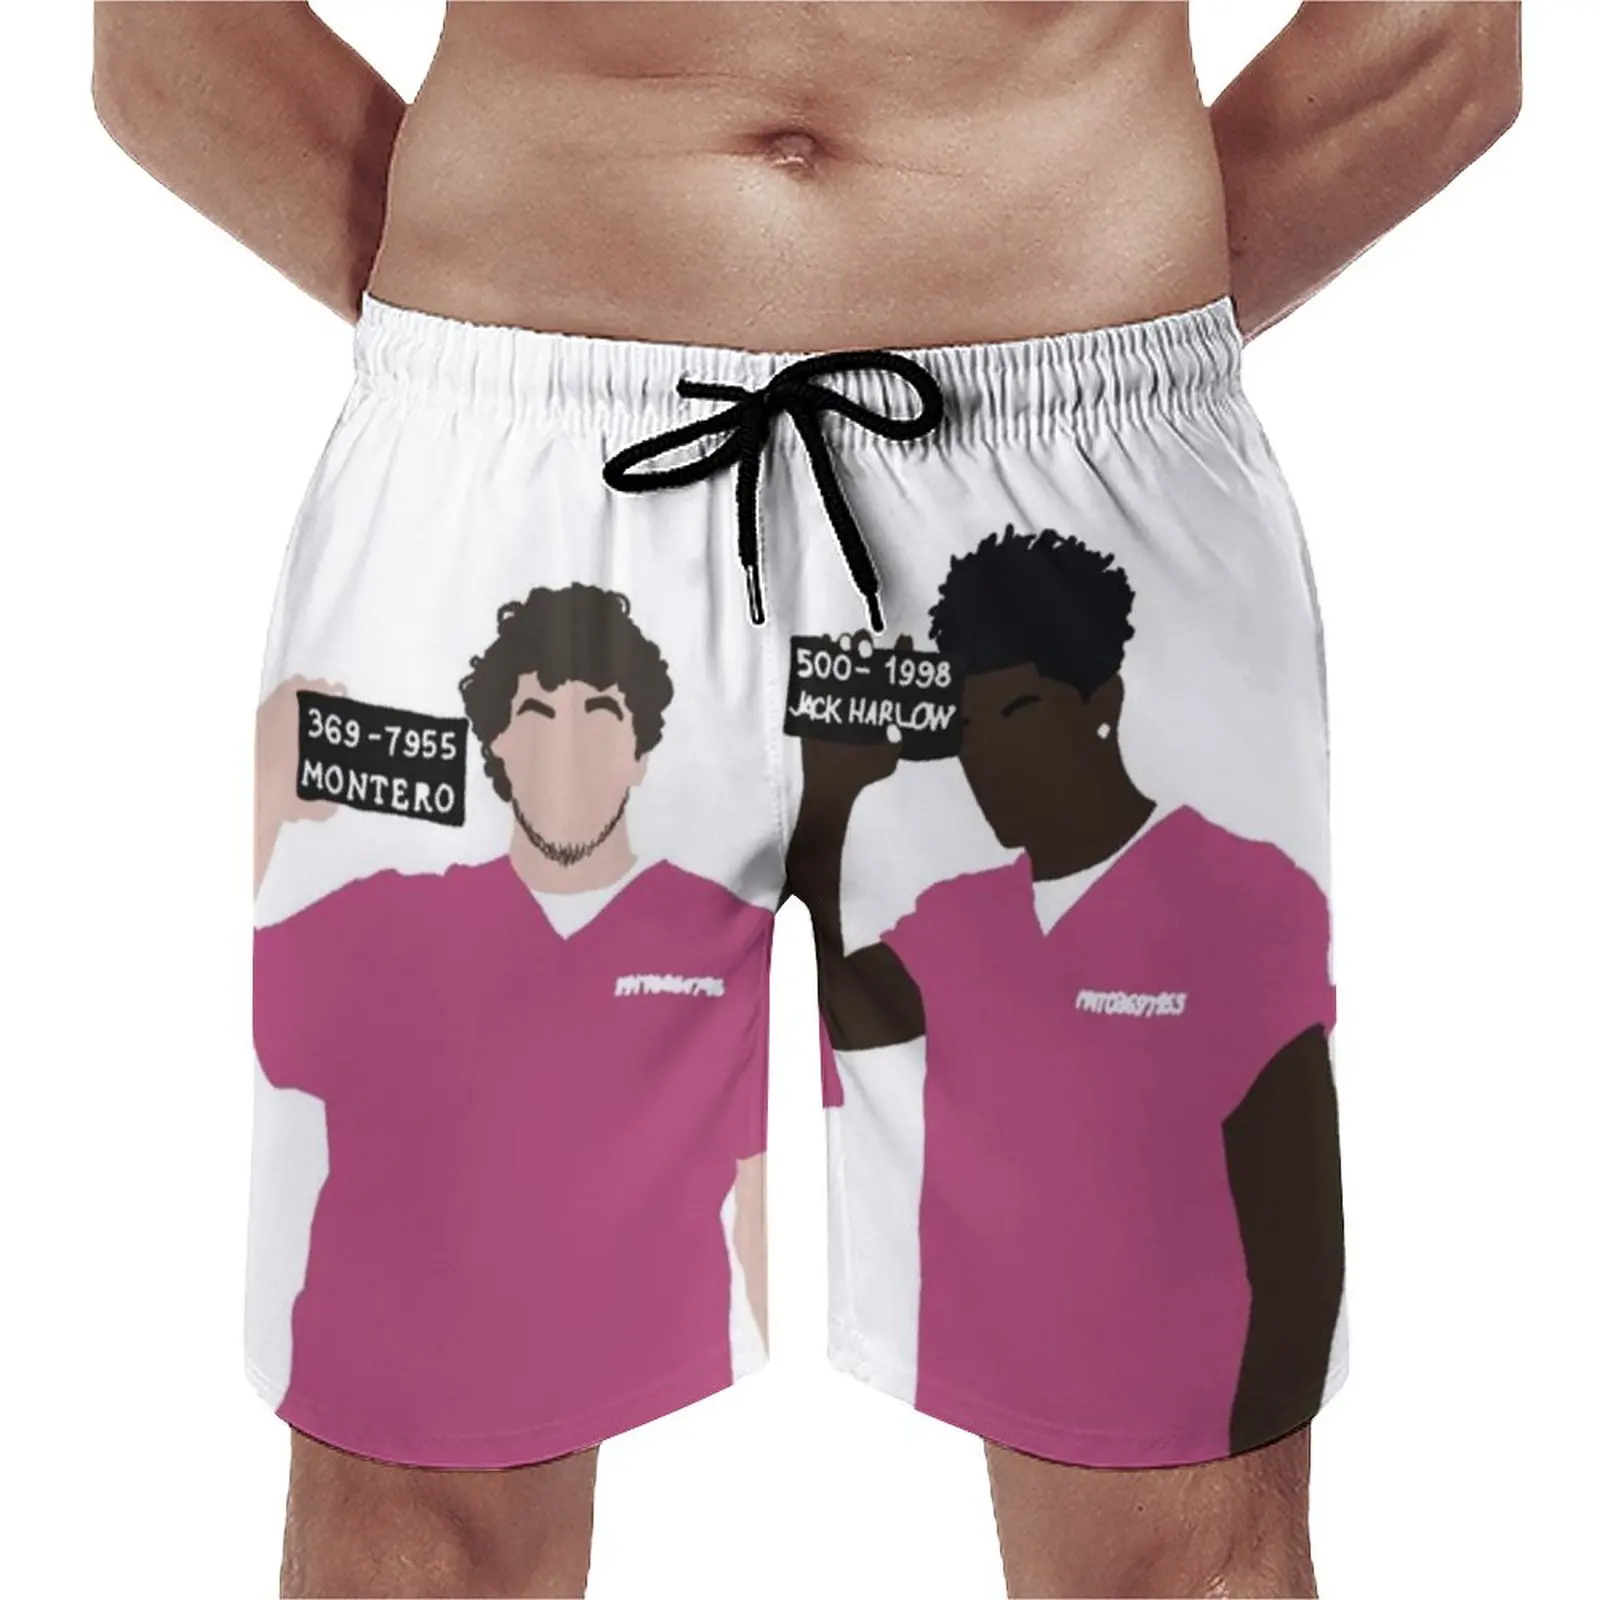 

Lil Nas X Jack Harlow Board Shorts Montero Album Cooperate Singers Record Man Cute Board Short Pants Hot Print Plus Size Trunks